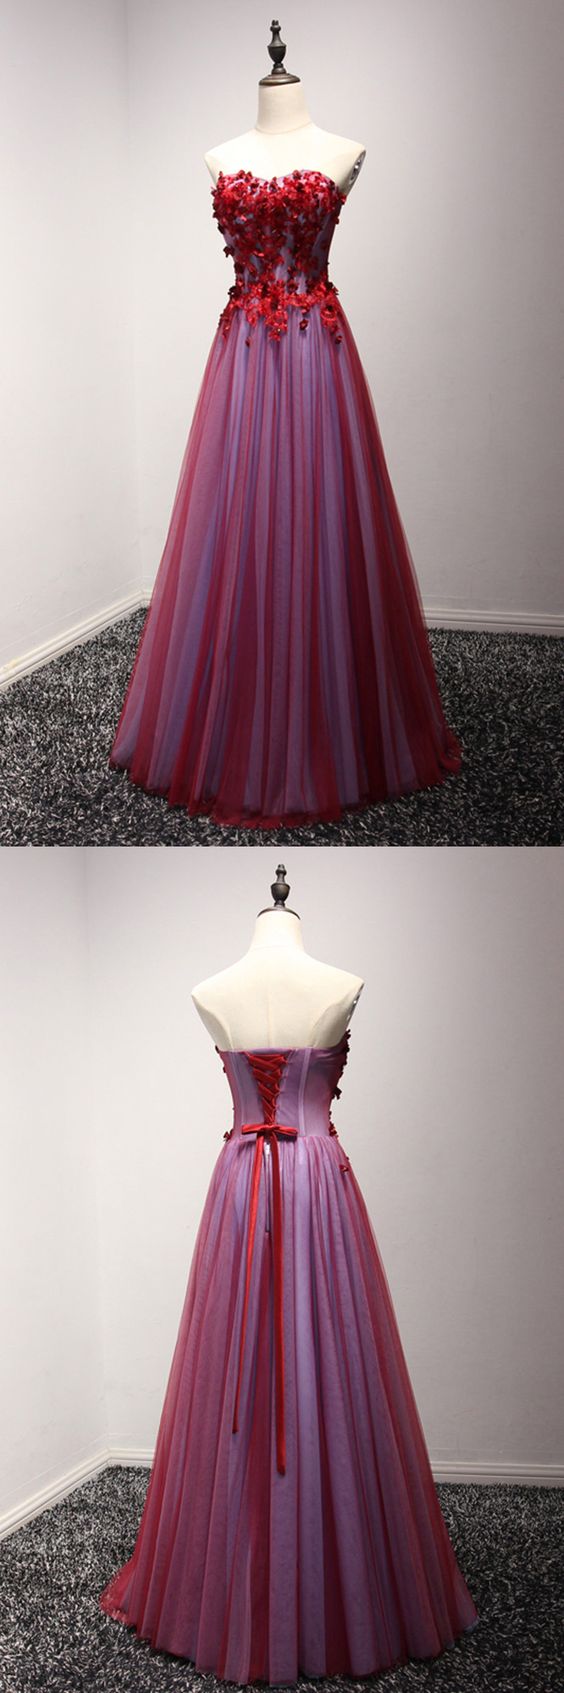 Long Red Strapless Prom Dress With Beaded Floral Lace M1286